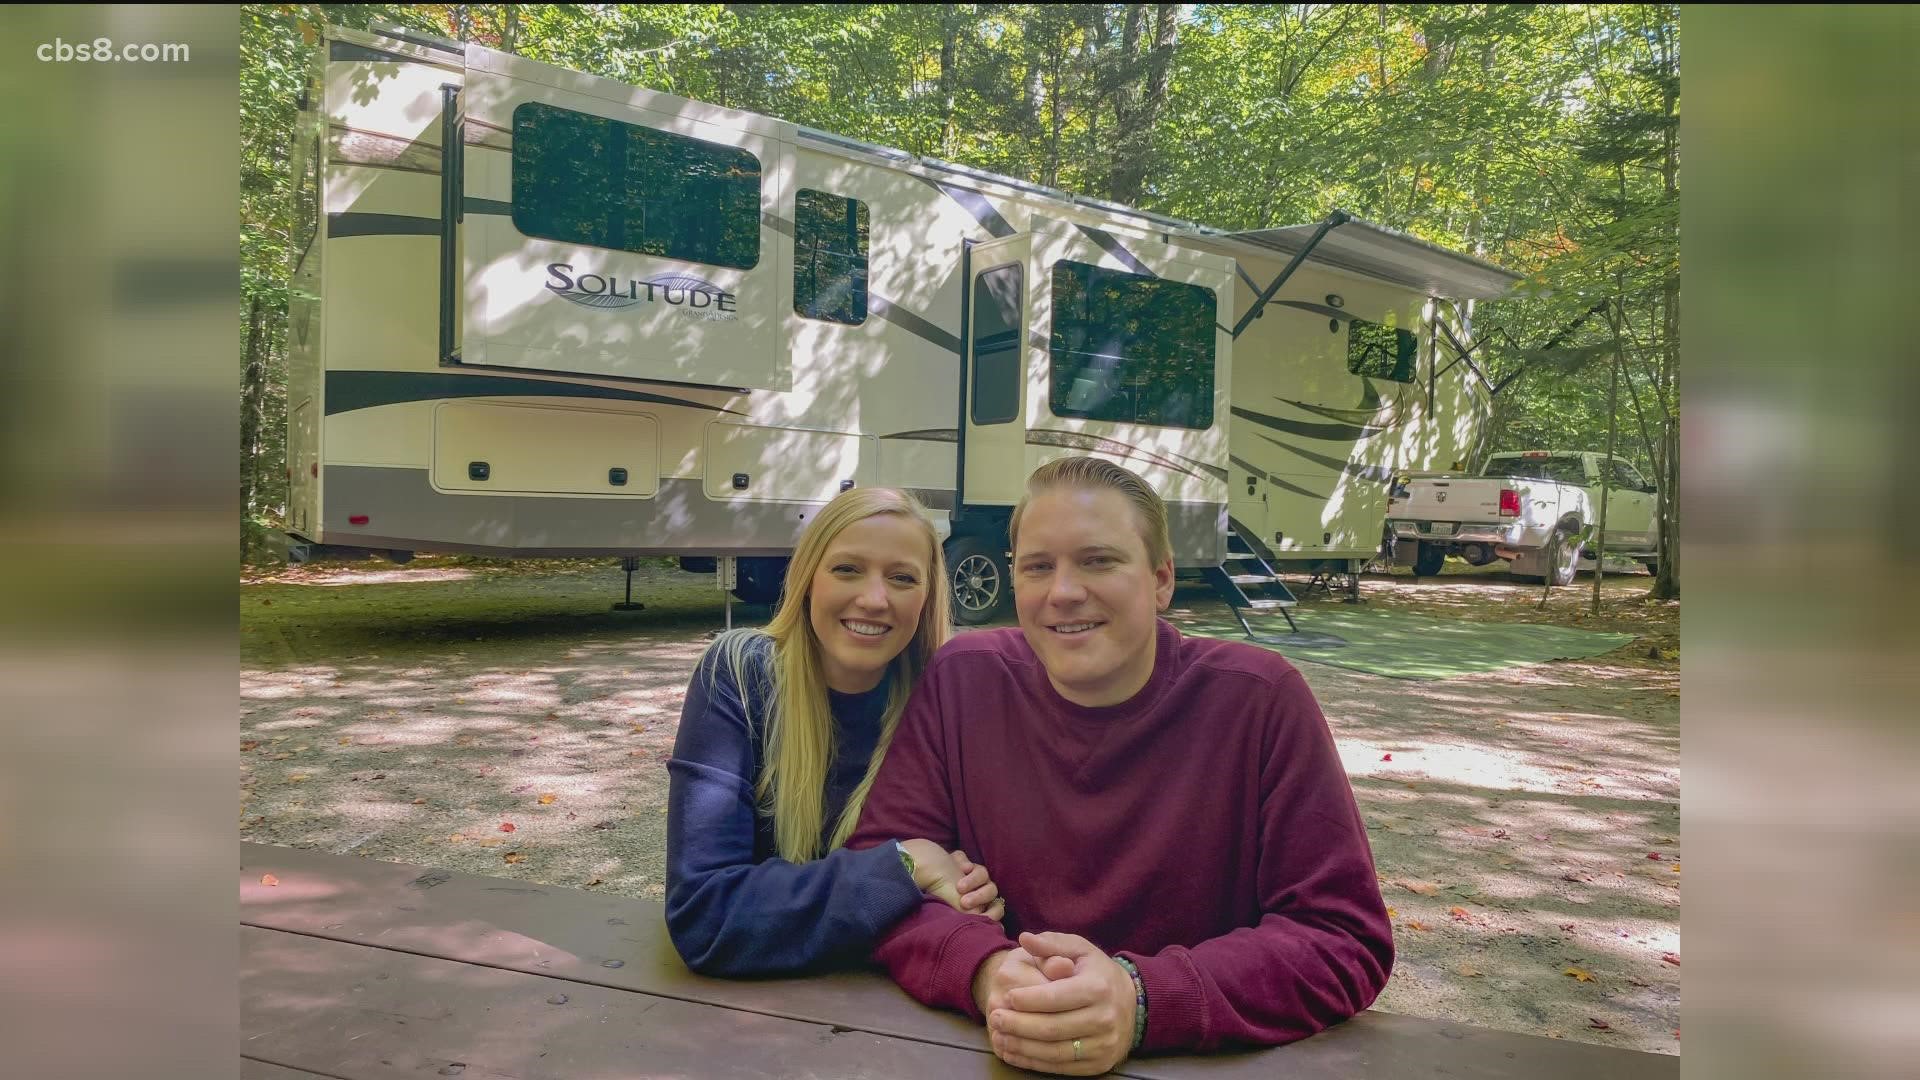 Are you ready to getaway? Rae & Jason Miller, better known as the Getaway Couple, have made RVing a way of life. Here are some tips they share.